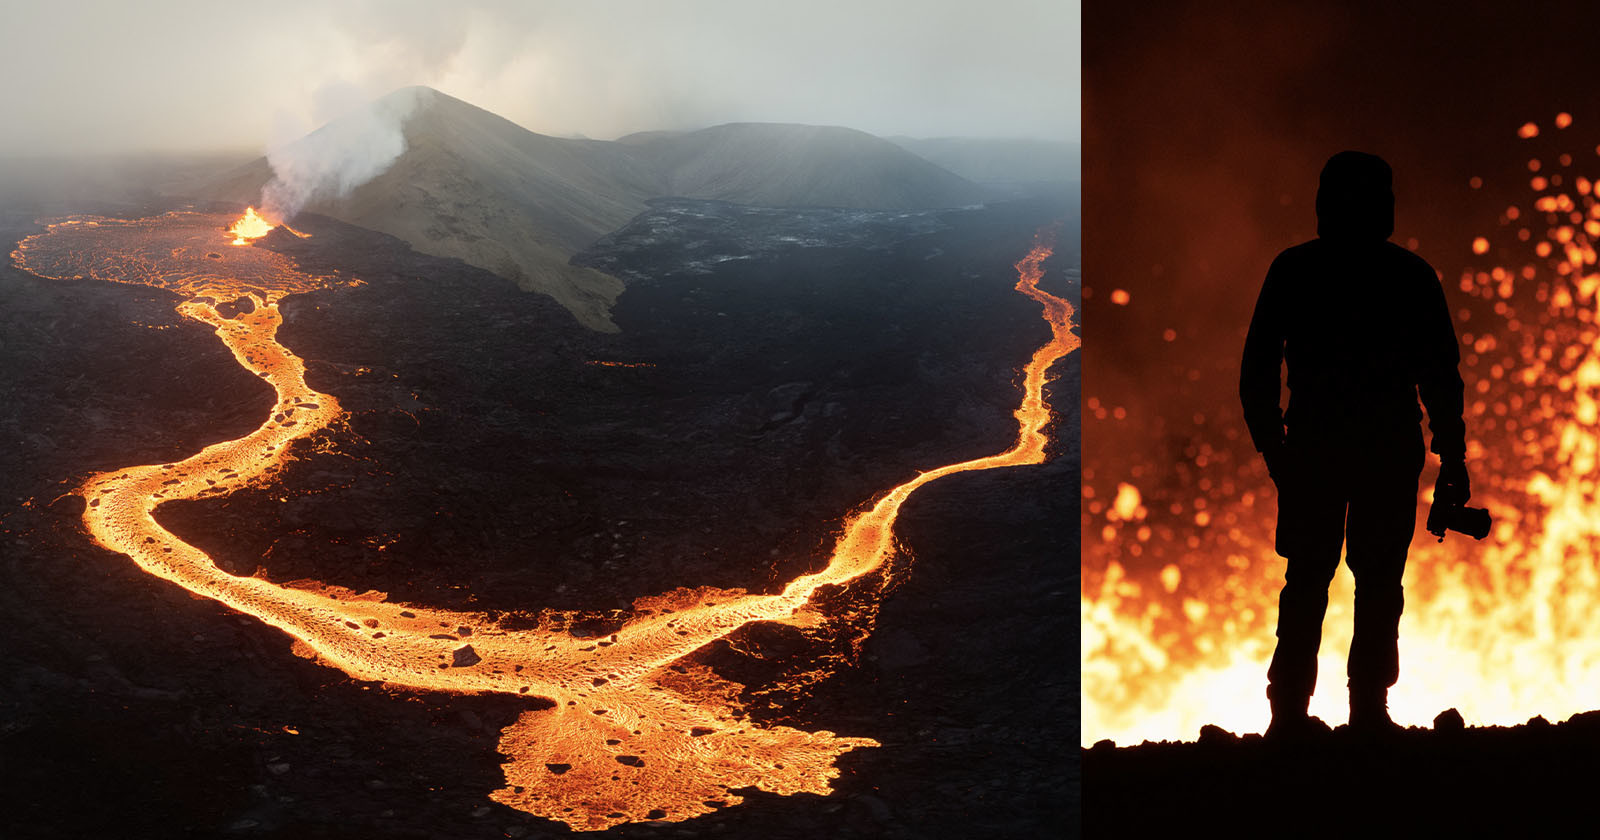 Breathtaking Film and Photos of Icelands Recent Volcanic Eruption